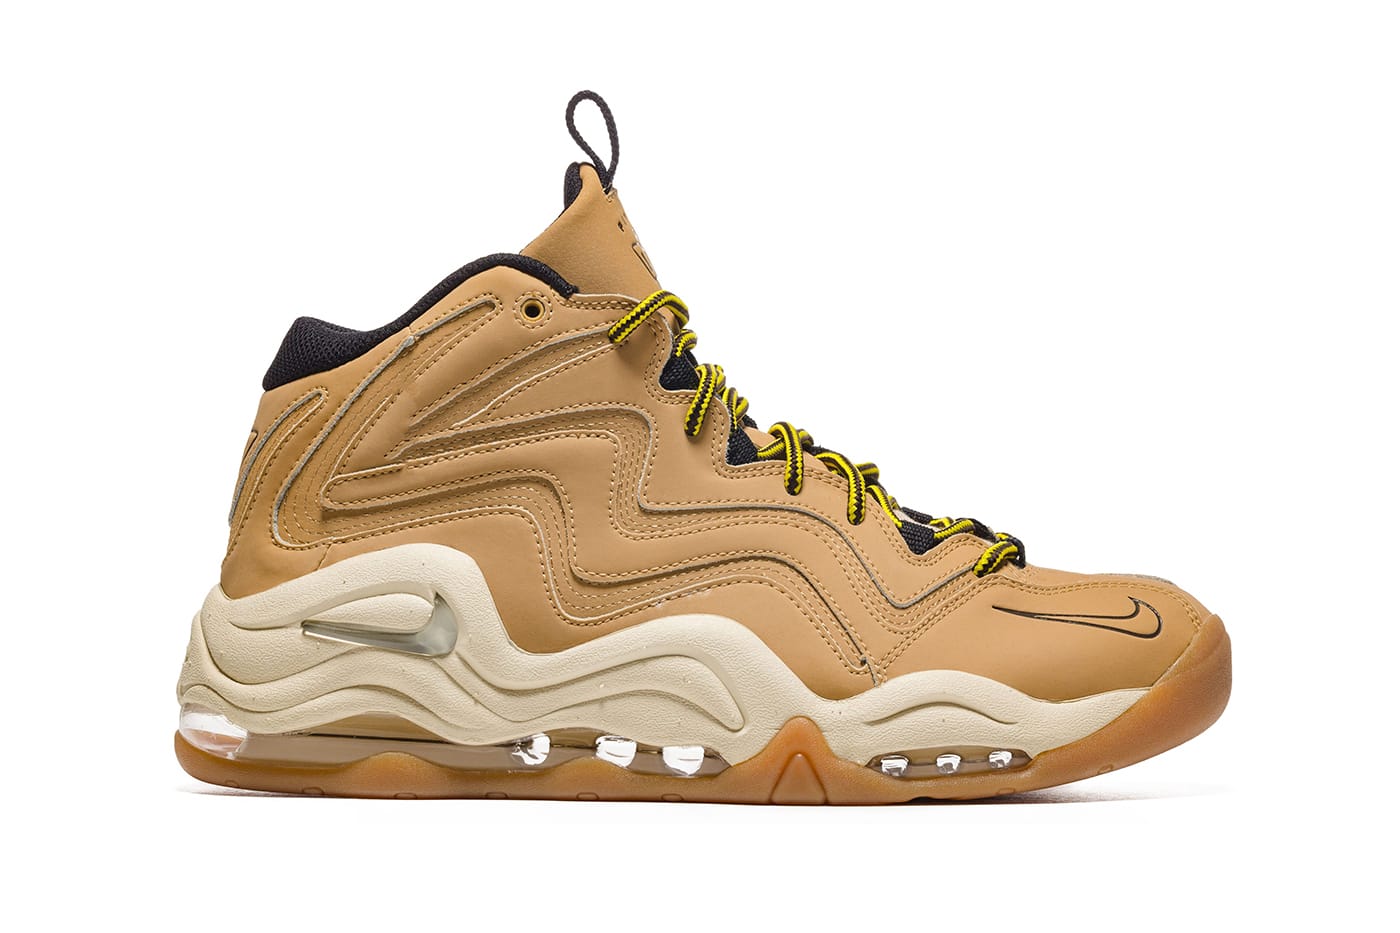 Nike Air Pippen 1 Remixed in a Boot 